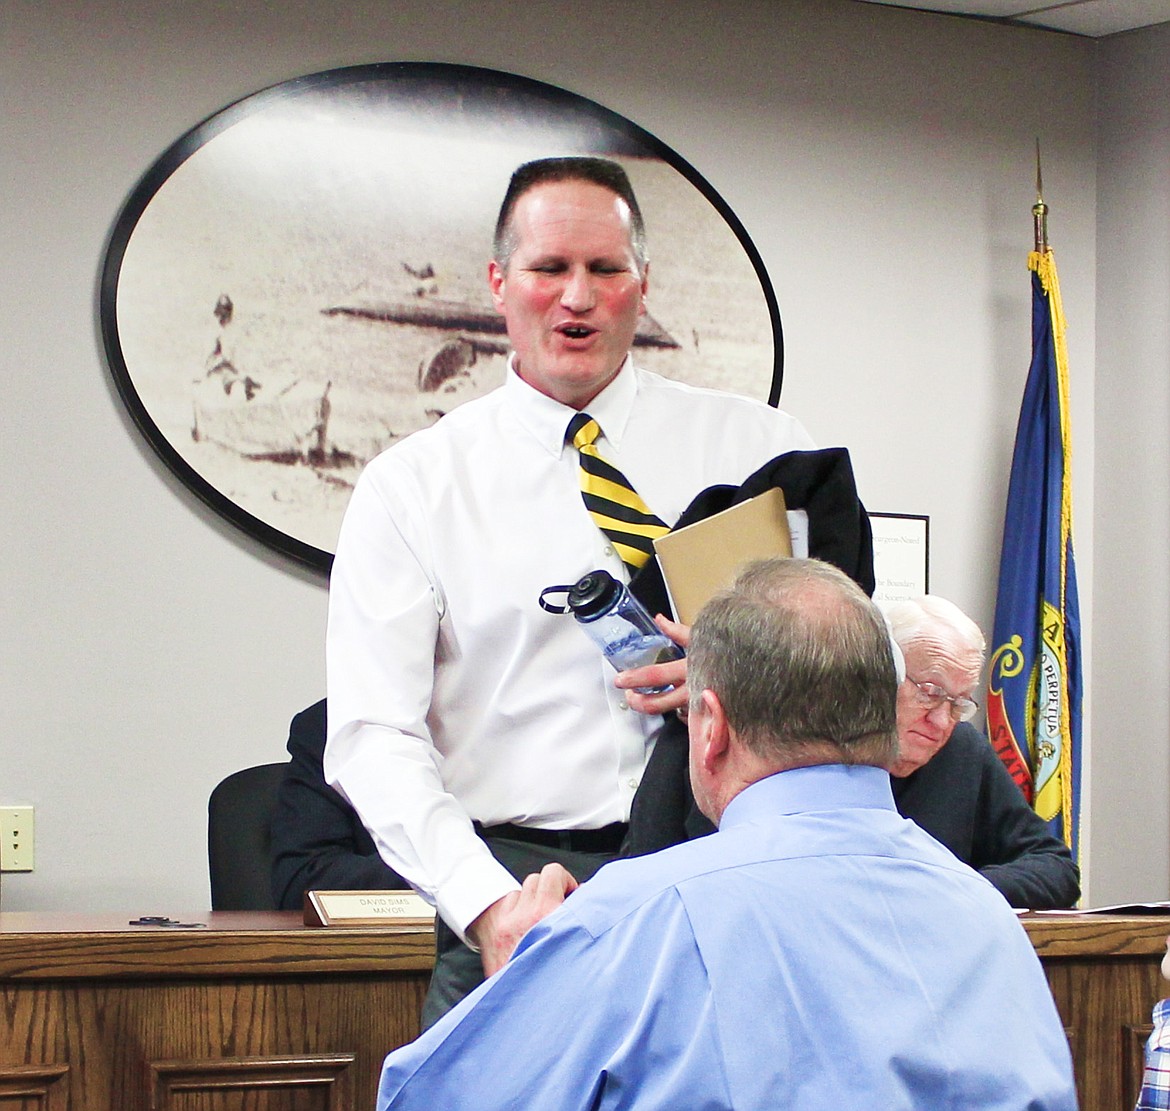 Photo by TONIA BROOKS
During Tuesday evening&#146;s crowded City Council meeting, David Sims steps down and welcomes Dick Staples to the position of Bonners Ferry Mayor.